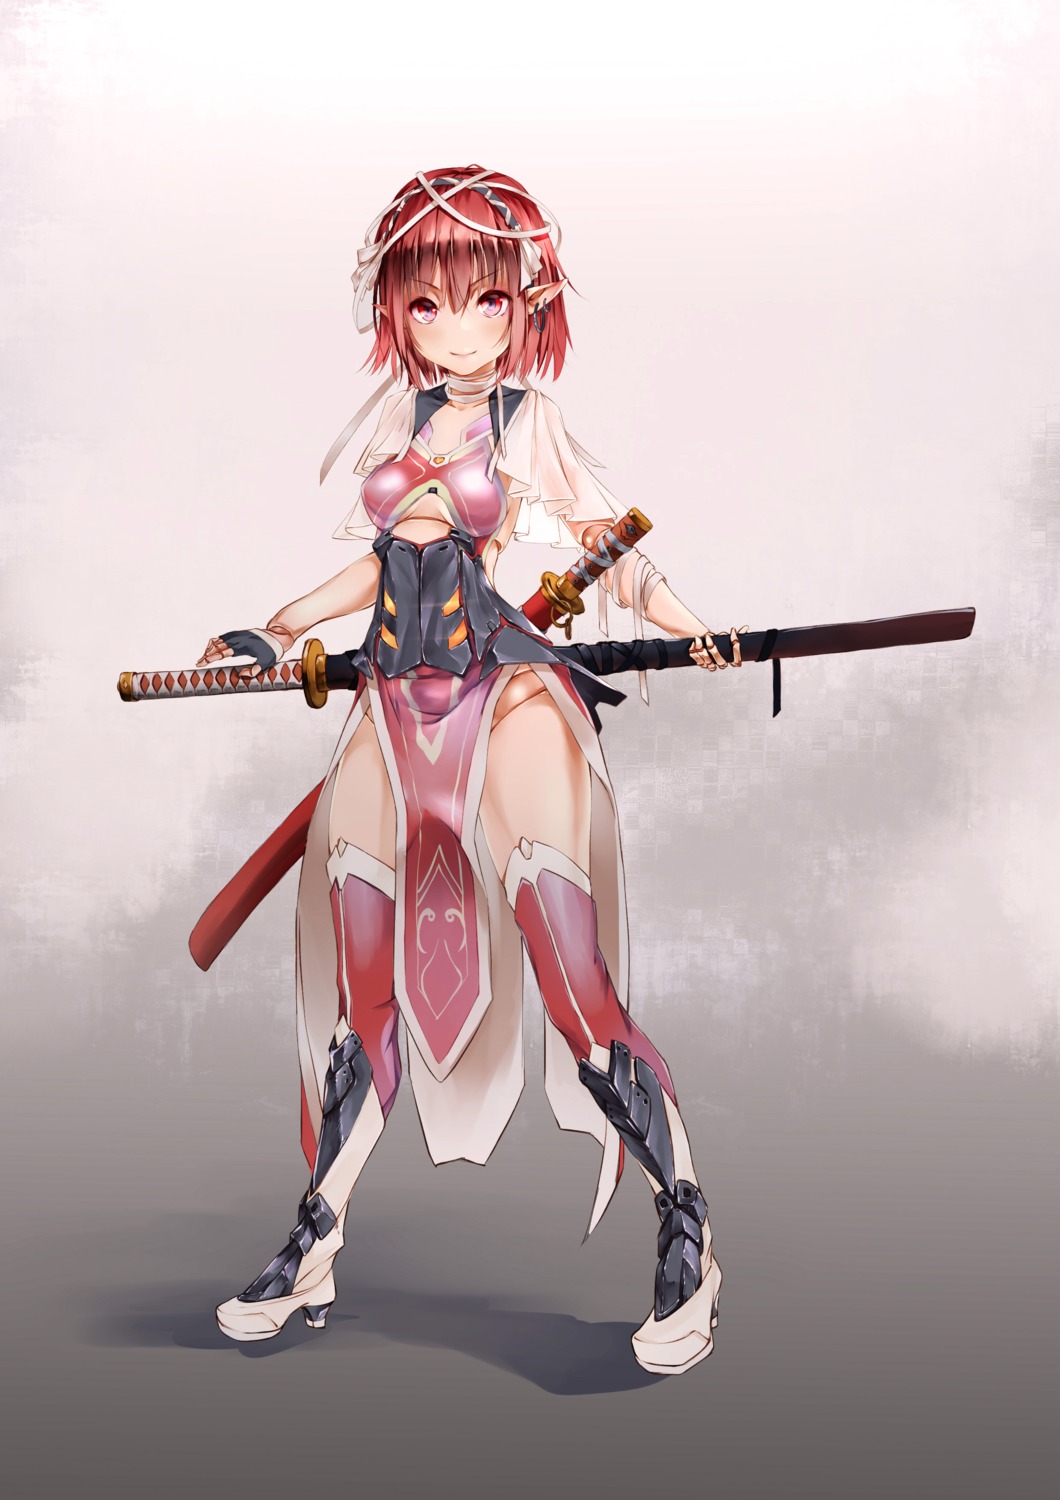 armor bad_old_driver bandages heels pantsu pointy_ears sword thighhighs